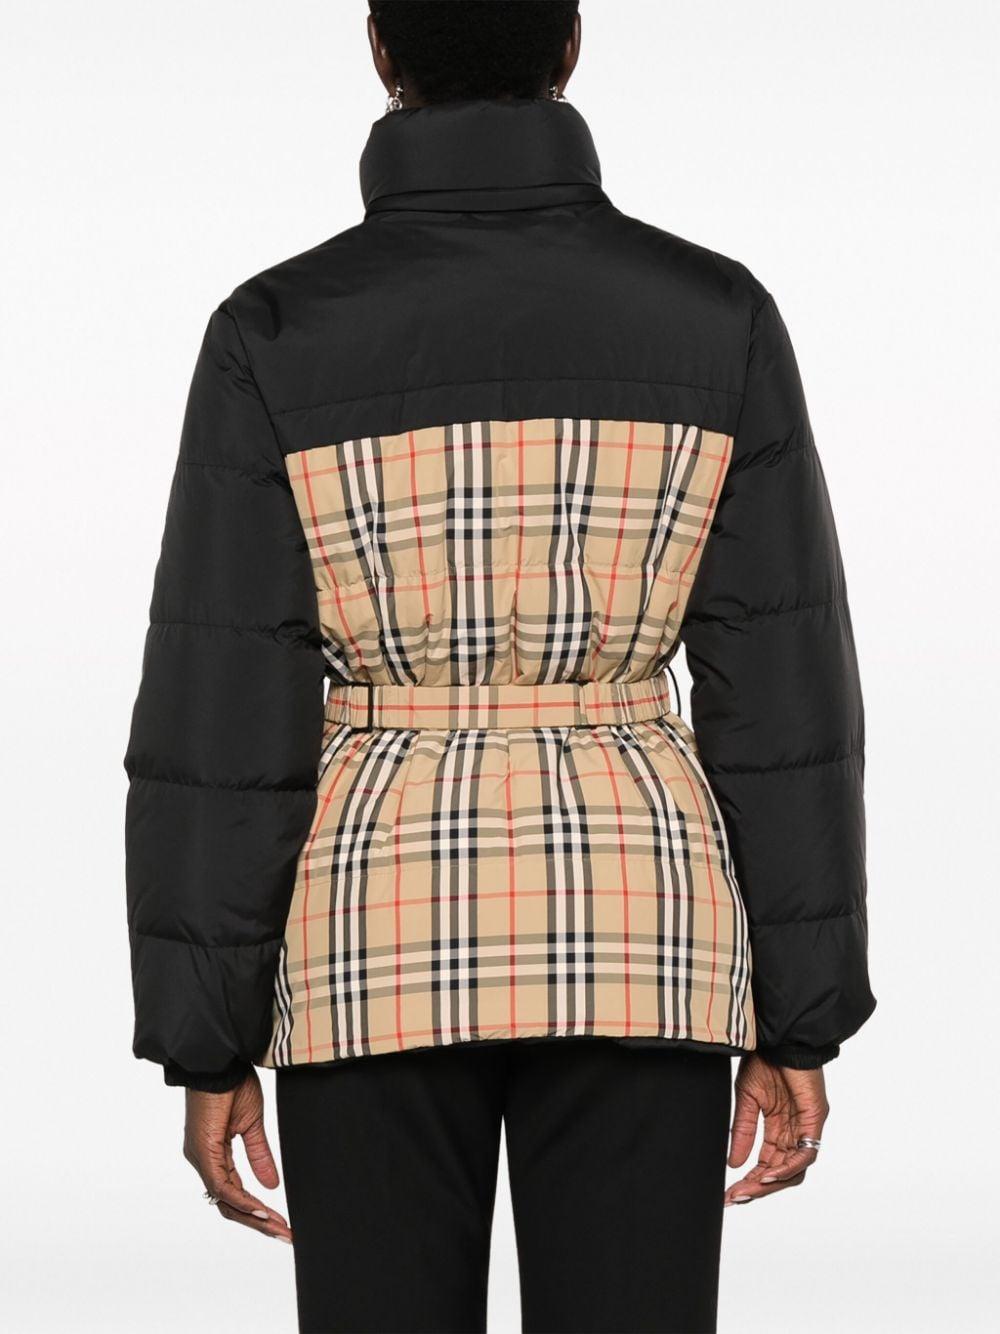 Burberry Down Jacket in Black | Lyst